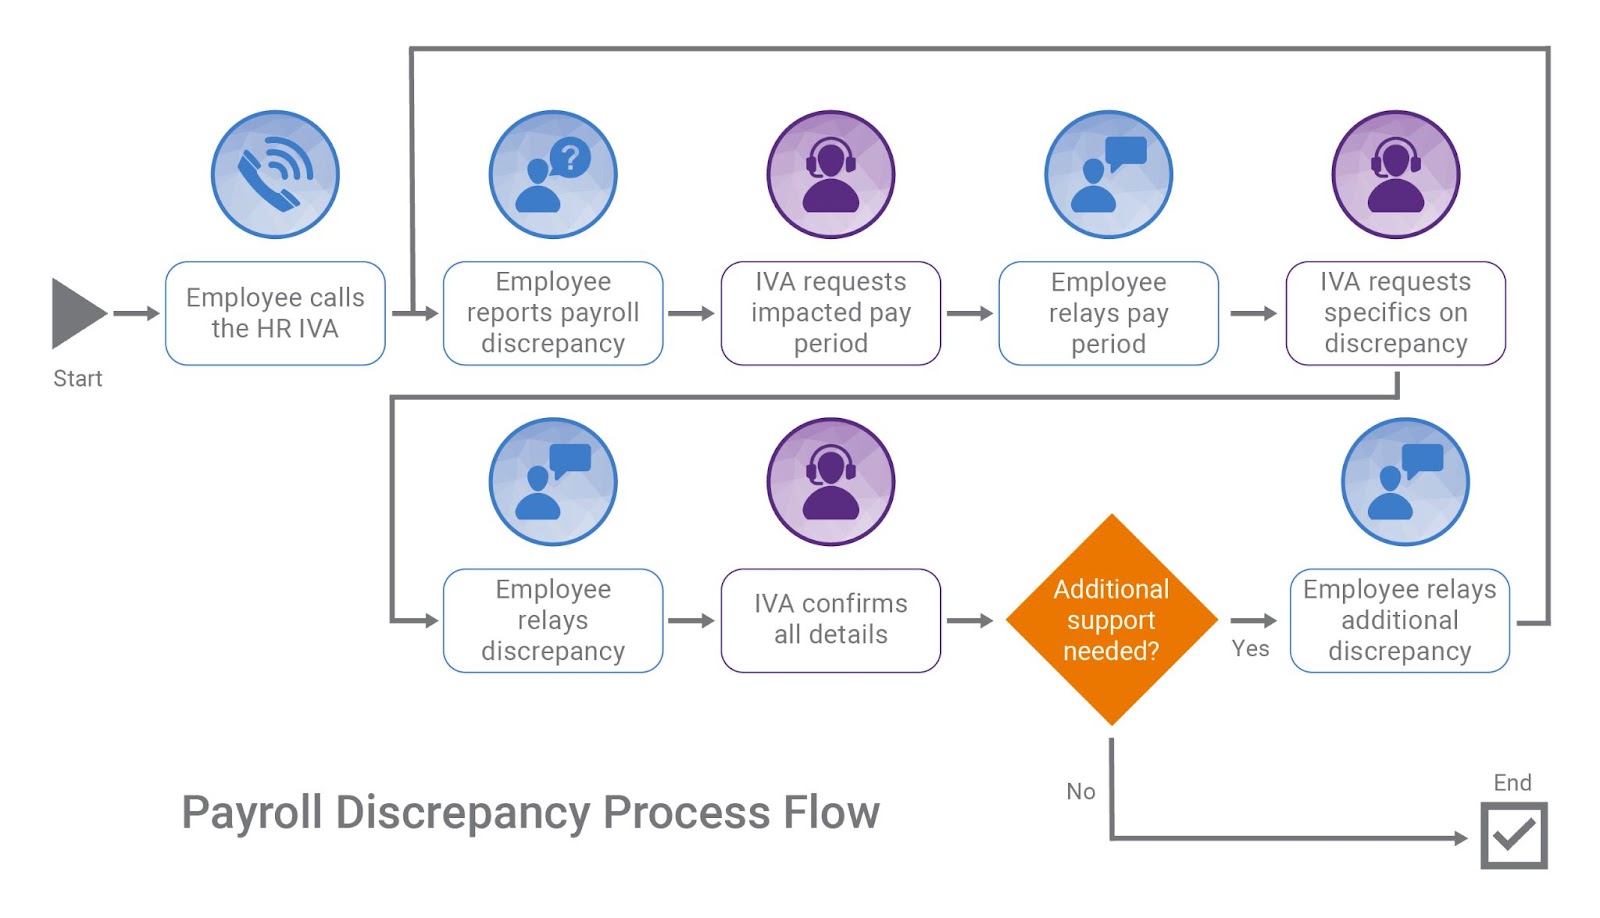 Example of a payroll discrepancy process flow.